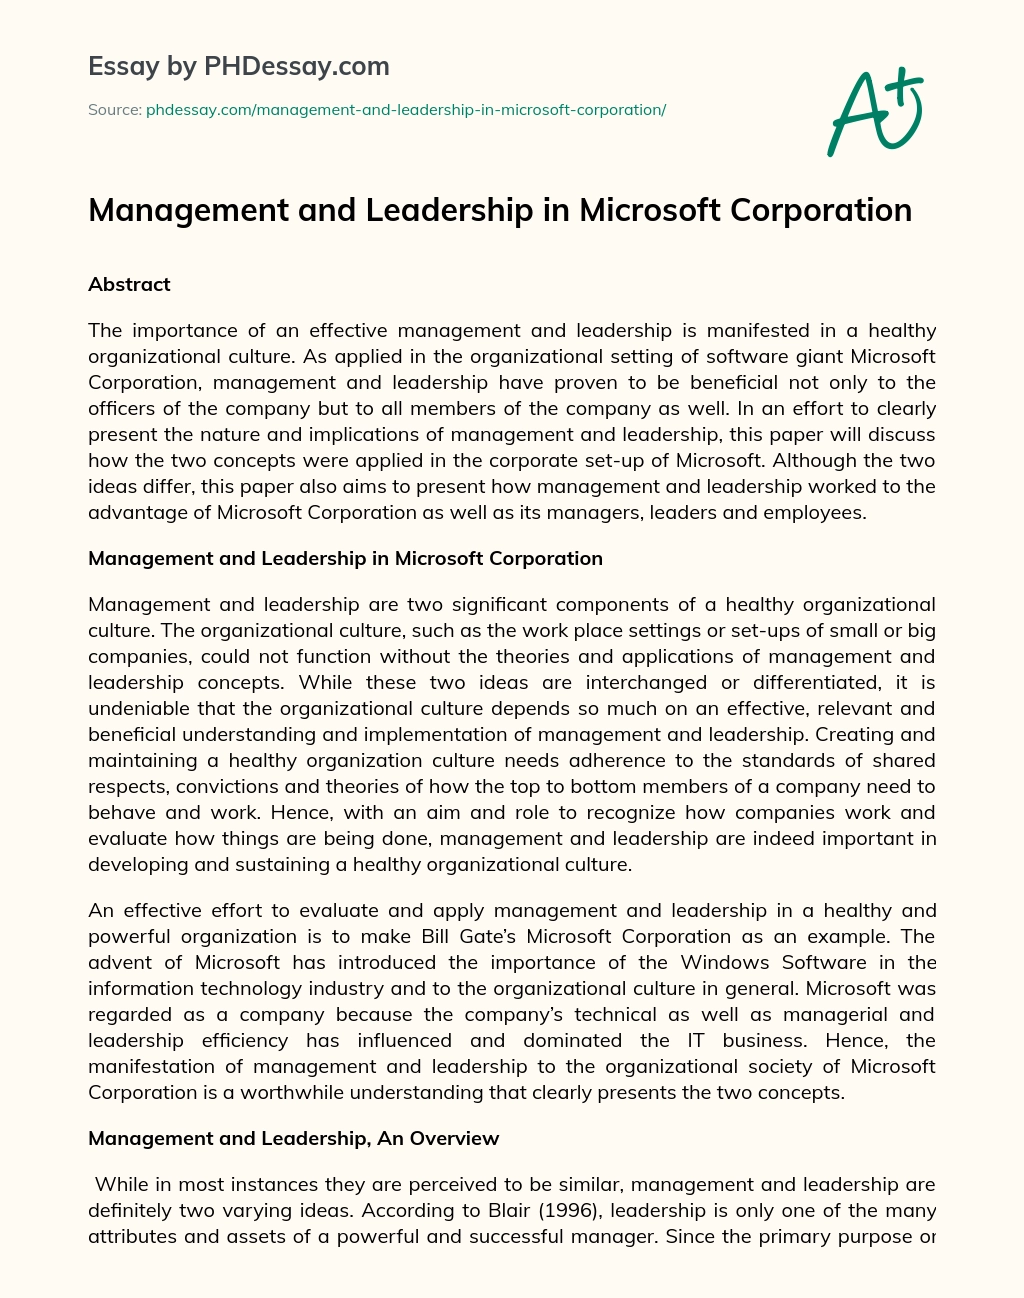 Management and Leadership in Microsoft Corporation essay